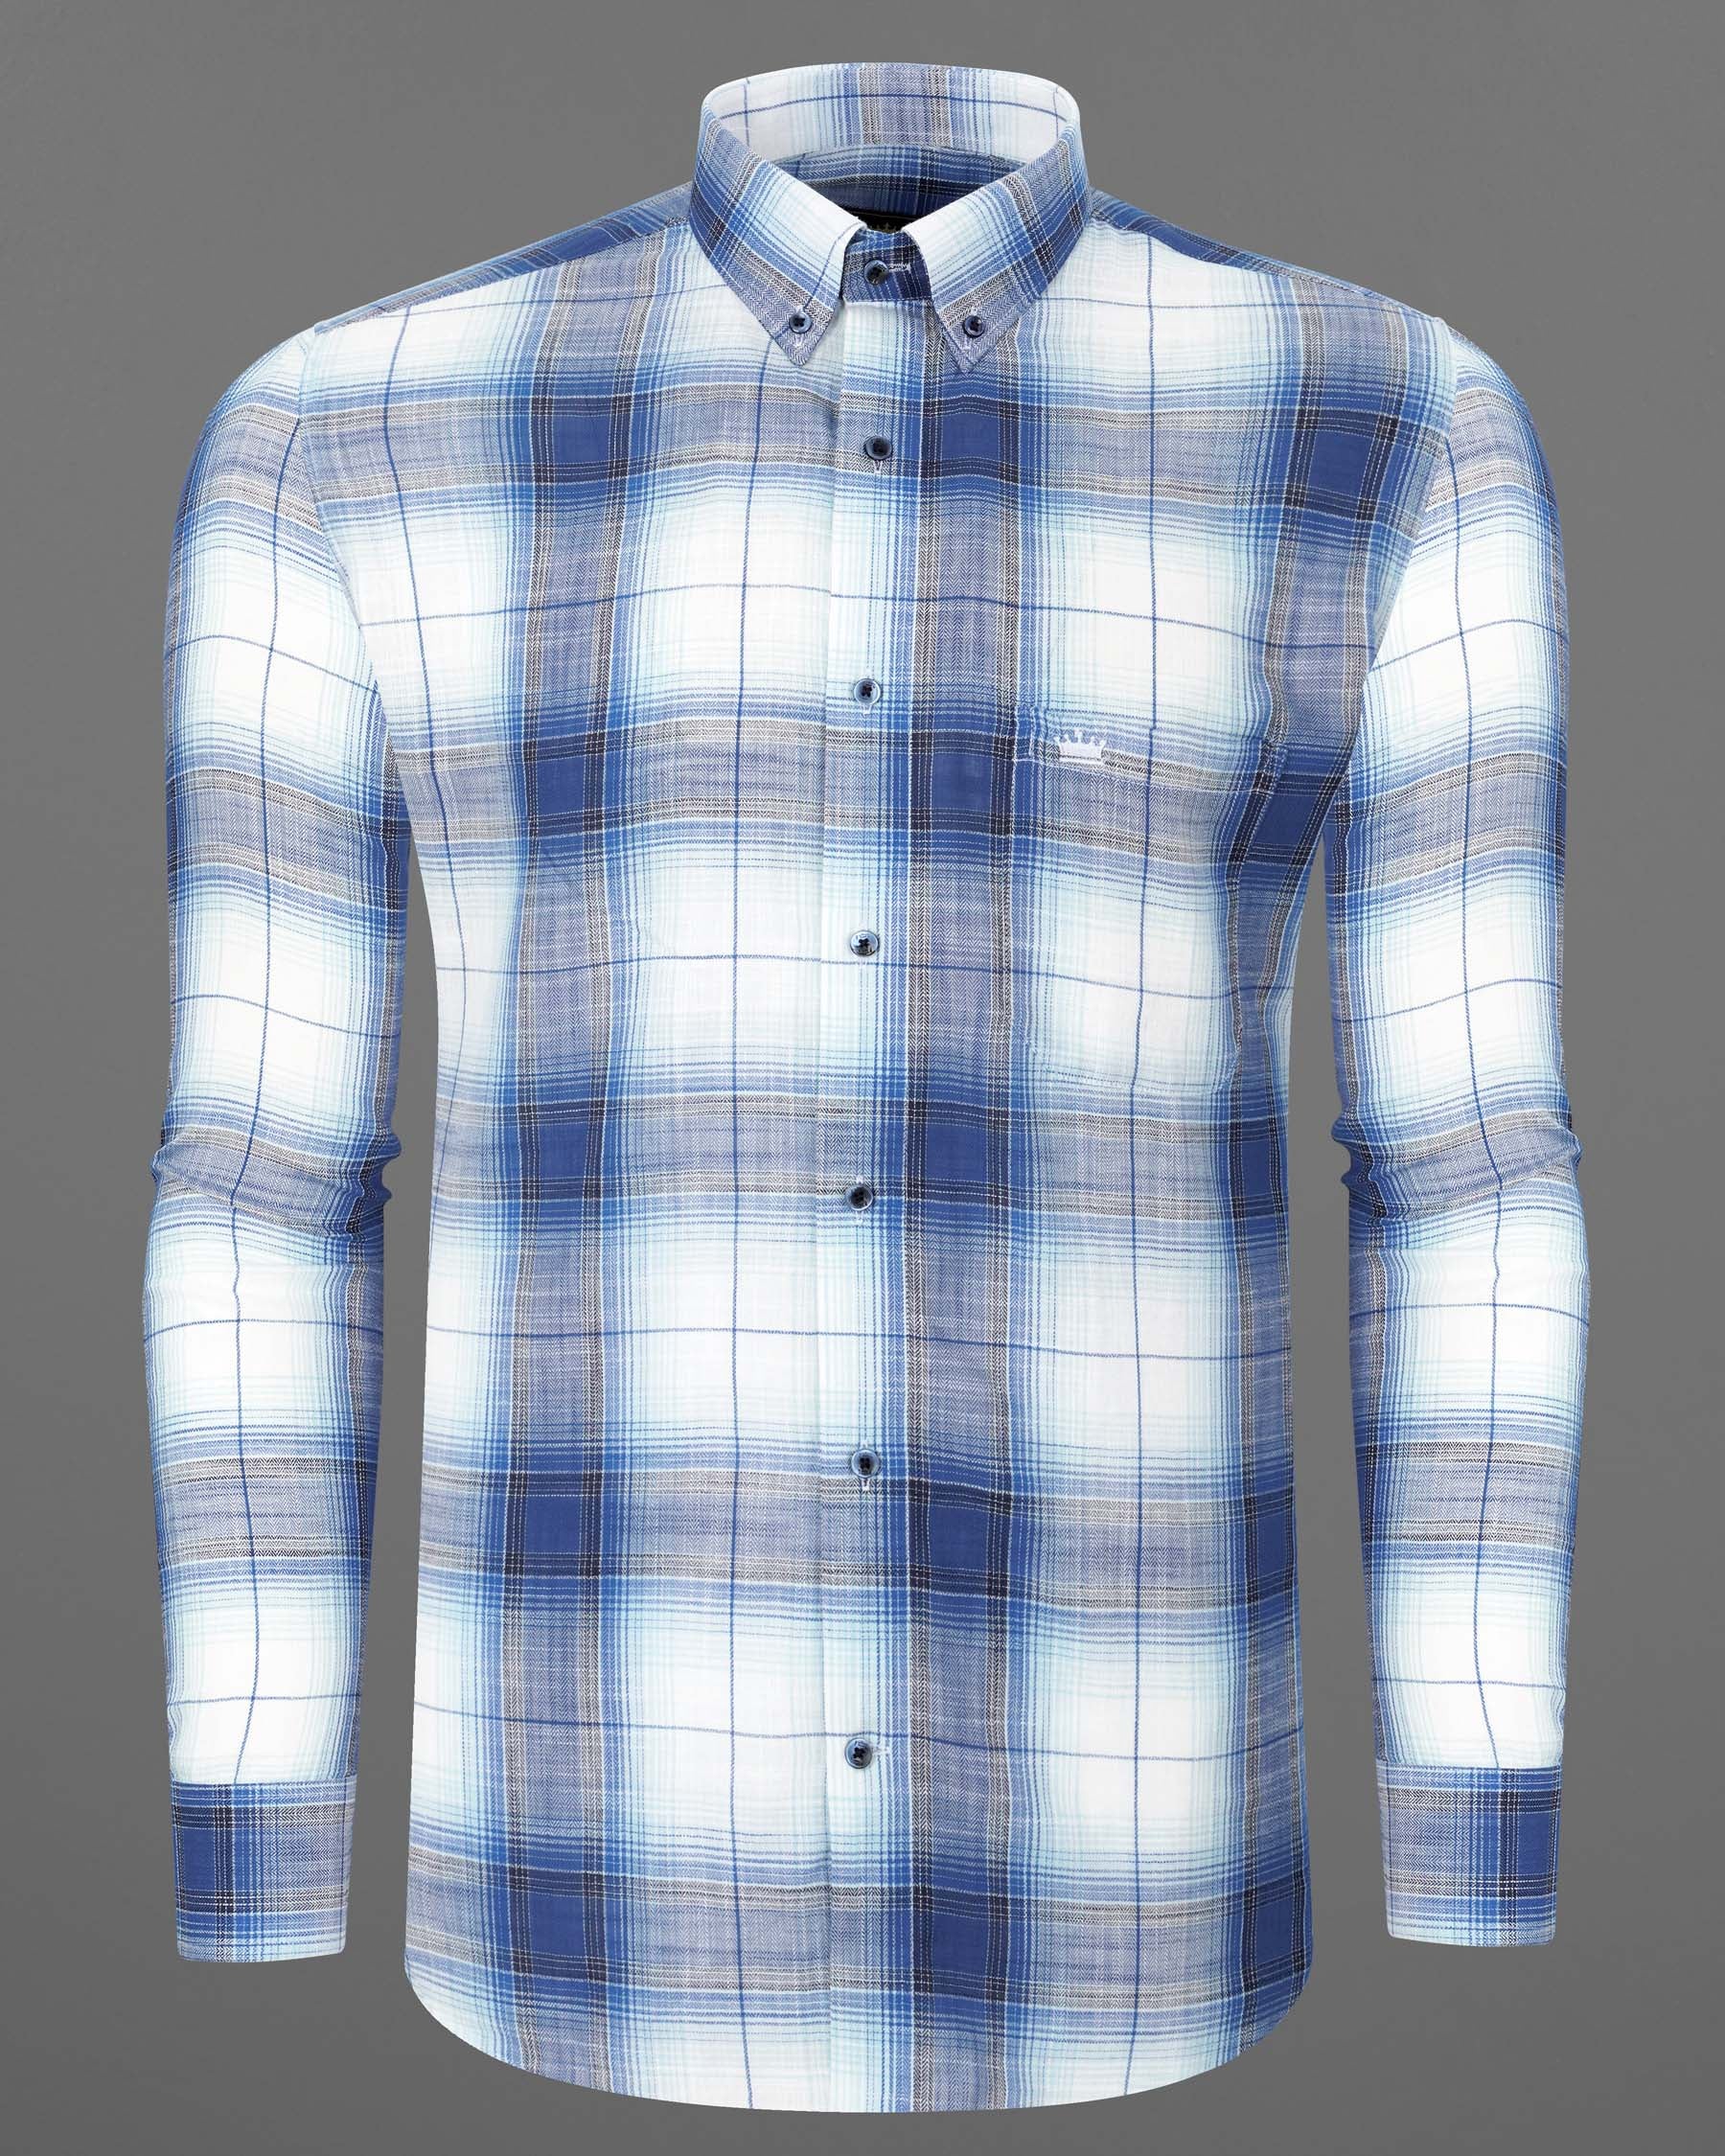 Bright White and Twilight Blue Plaid Herringbone Shirt 7624-BD-BLE-38, 7624-BD-BLE-H-38, 7624-BD-BLE-39,7624-BD-BLE-H-39, 7624-BD-BLE-40, 7624-BD-BLE-H-40, 7624-BD-BLE-42, 7624-BD-BLE-H-42, 7624-BD-BLE-44, 7624-BD-BLE-H-44, 7624-BD-BLE-46, 7624-BD-BLE-H-46, 7624-BD-BLE-48, 7624-BD-BLE-H-48, 7624-BD-BLE-50, 7624-BD-BLE-H-50, 7624-BD-BLE-52, 7624-BD-BLE-H-52